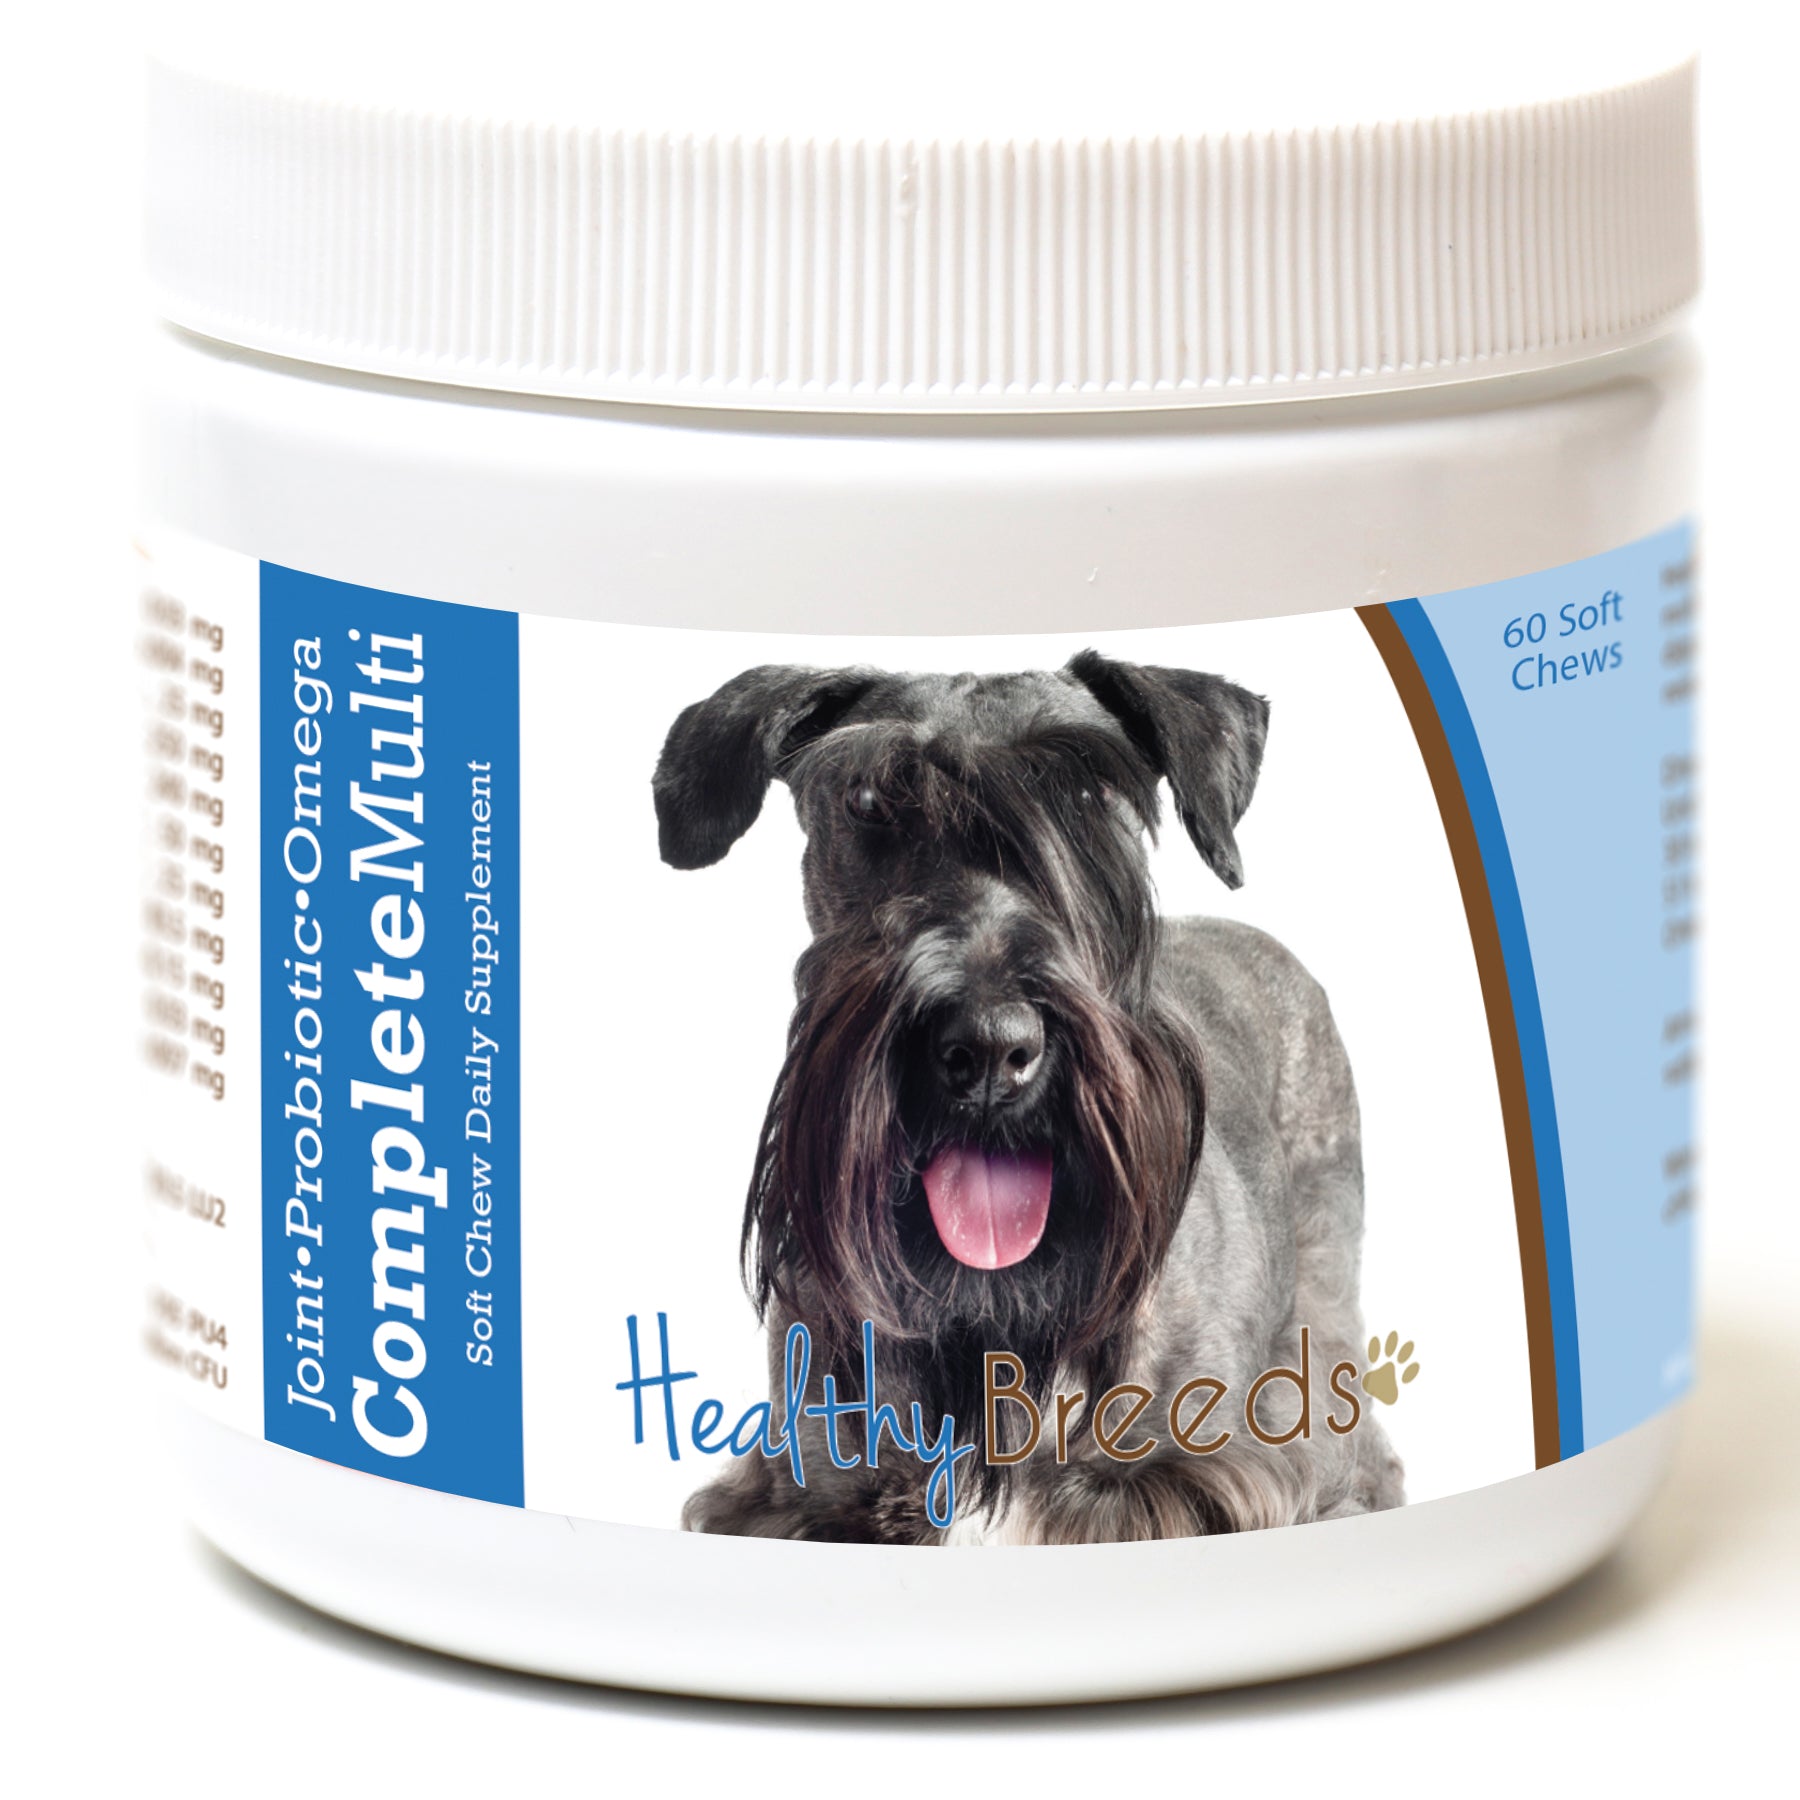 Cesky Terrier All In One Multivitamin Soft Chew 60 Count